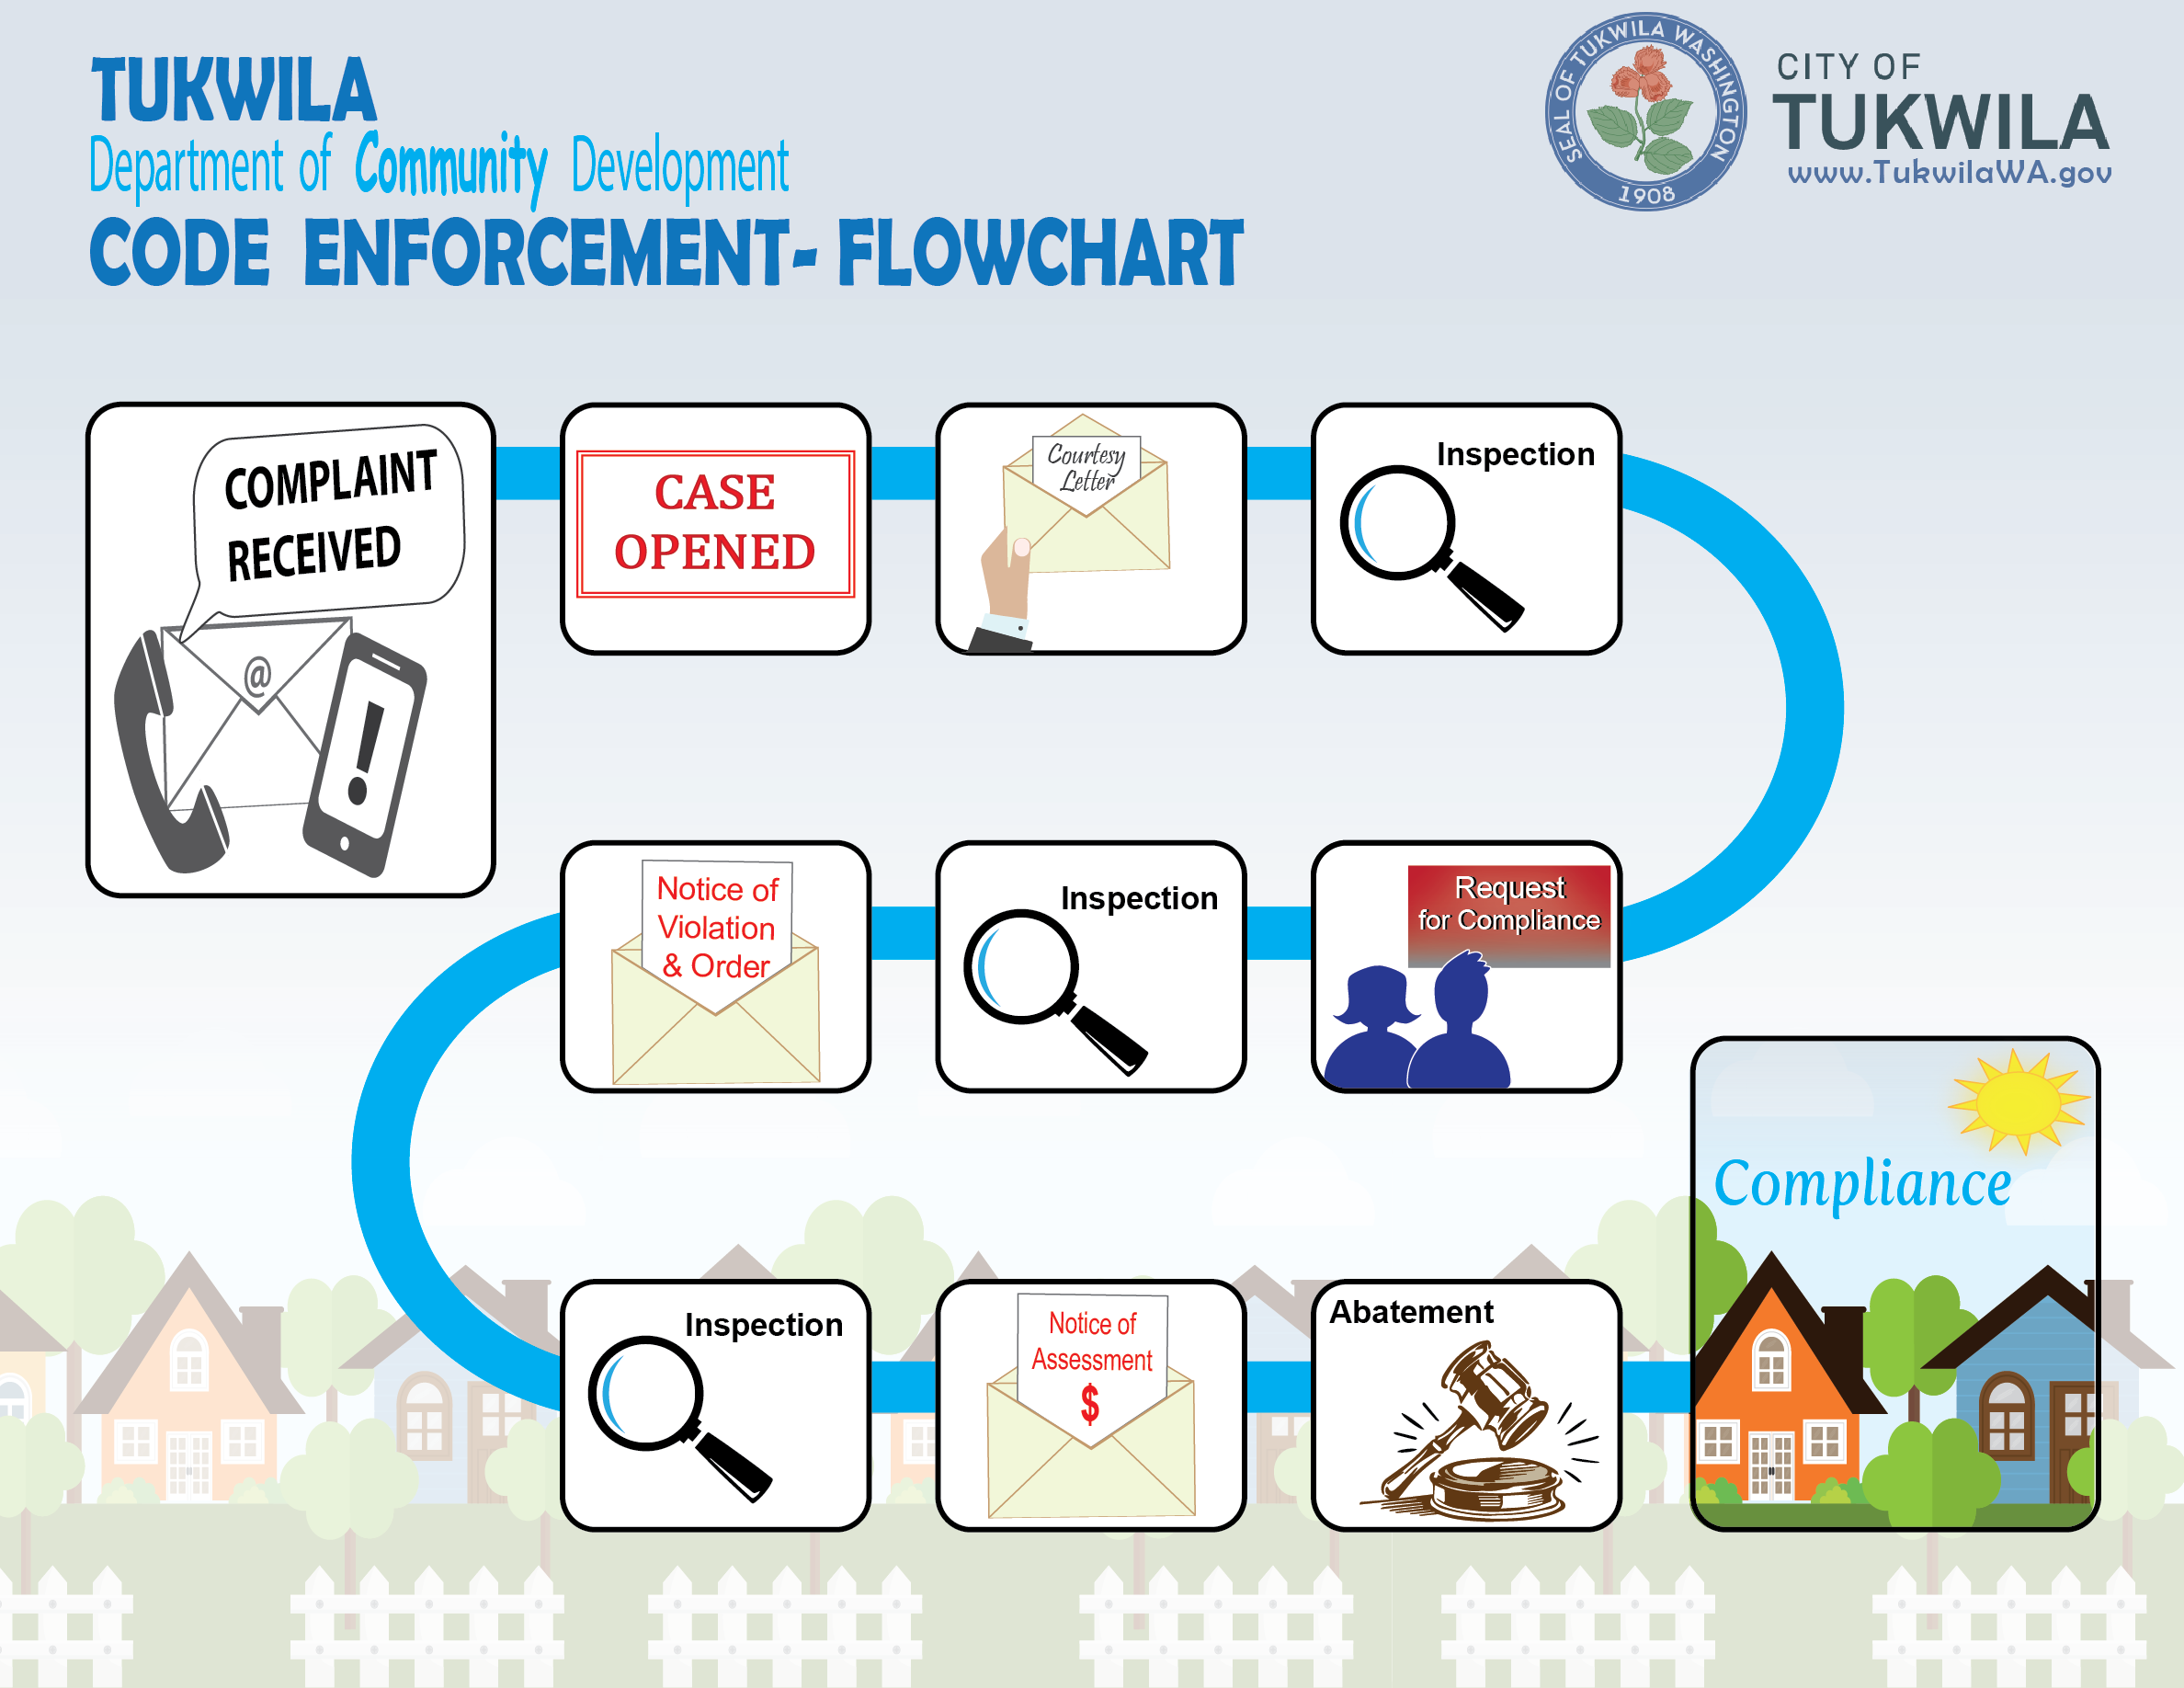 Code Enforcement Flowchart. 1) Complaint Received. 2) A Case is Opened. 3) A Courtesy Letter Sent. 4) A Code Enforcement Officer Inspects the property. 5) A Request for Compliance is issued. 6) another Inspection. 7) A Notice of Violation and Order is issued. 8) Inspection to check compliance. 9) A Notice of Assessment is issued. 10) If the property is still in violation court ordered Abatement is required. 11) Final Stage: Compliance